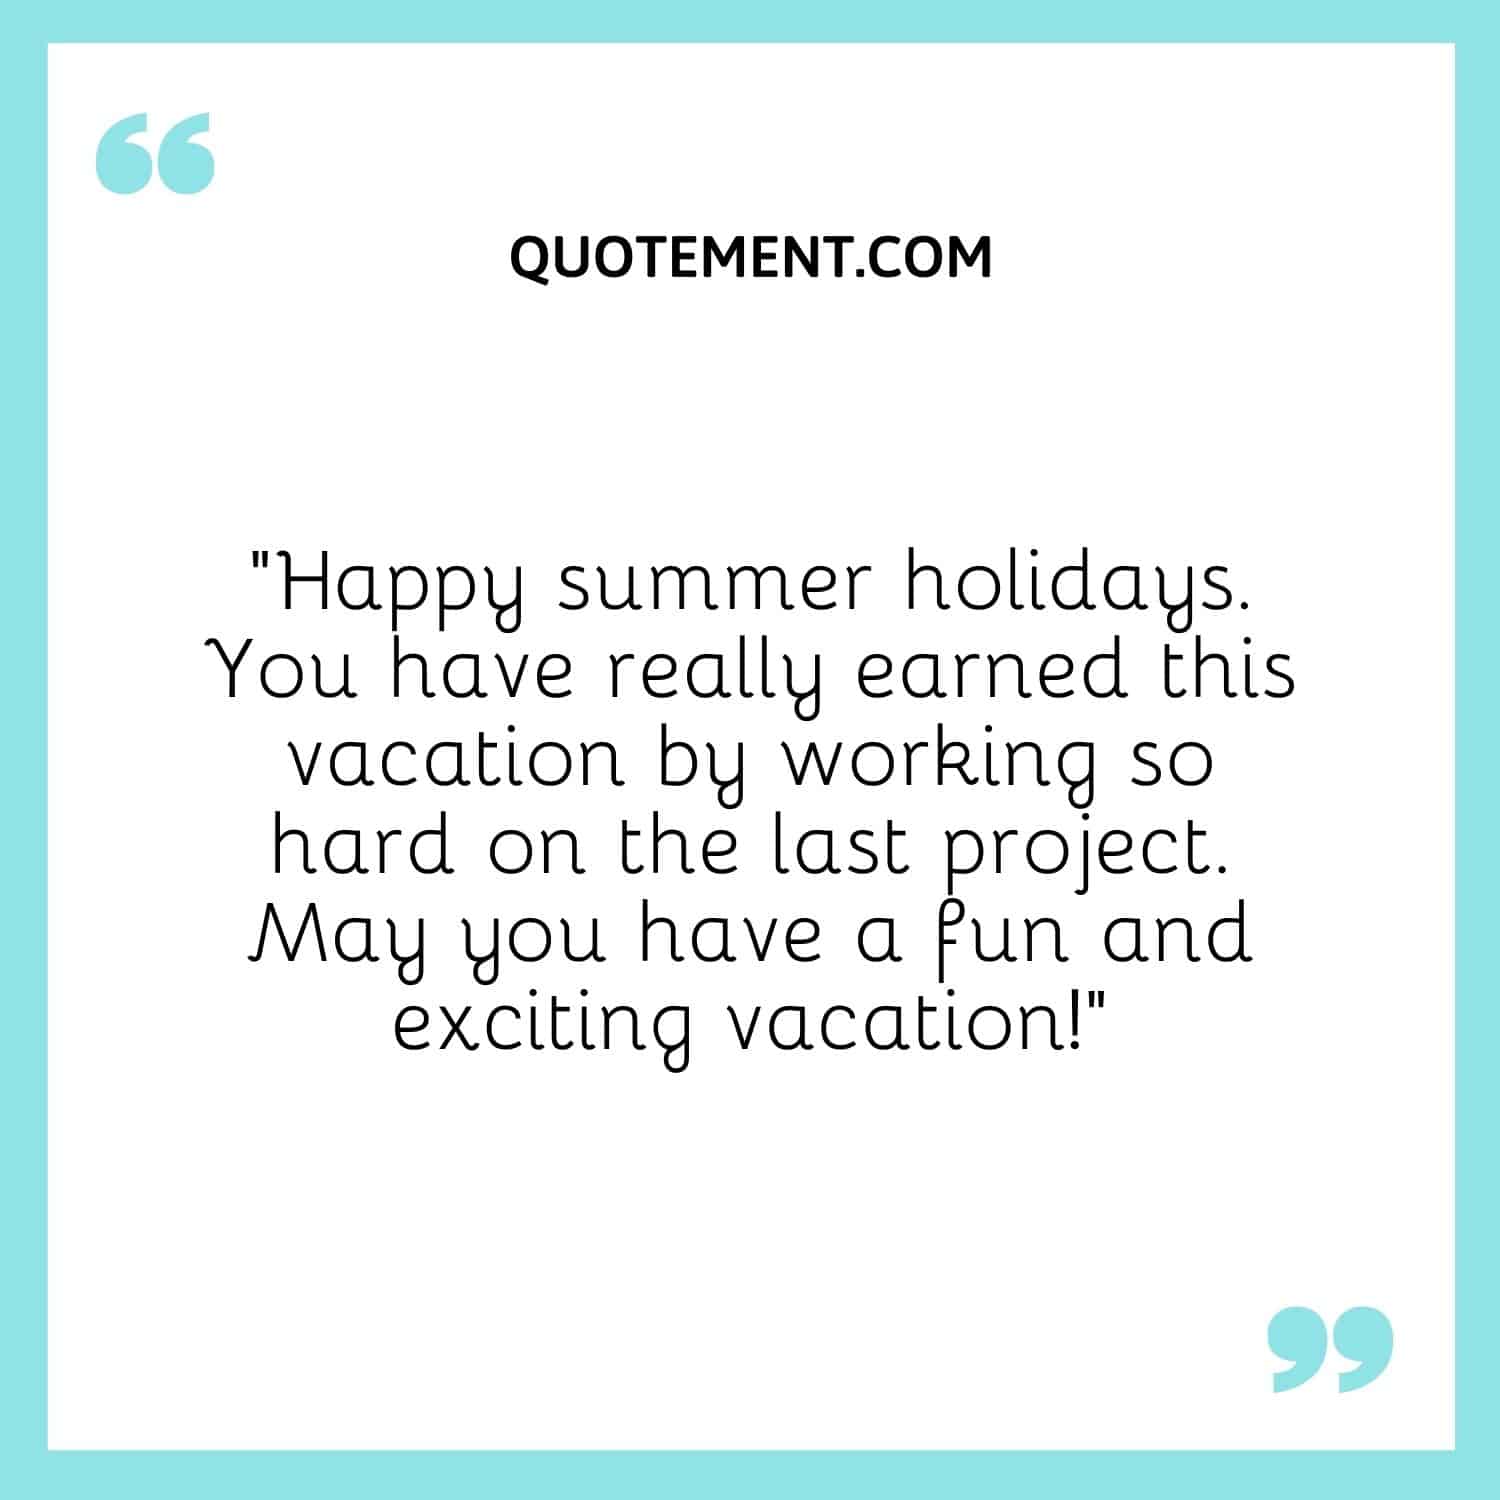 May you have a fun and exciting vacation